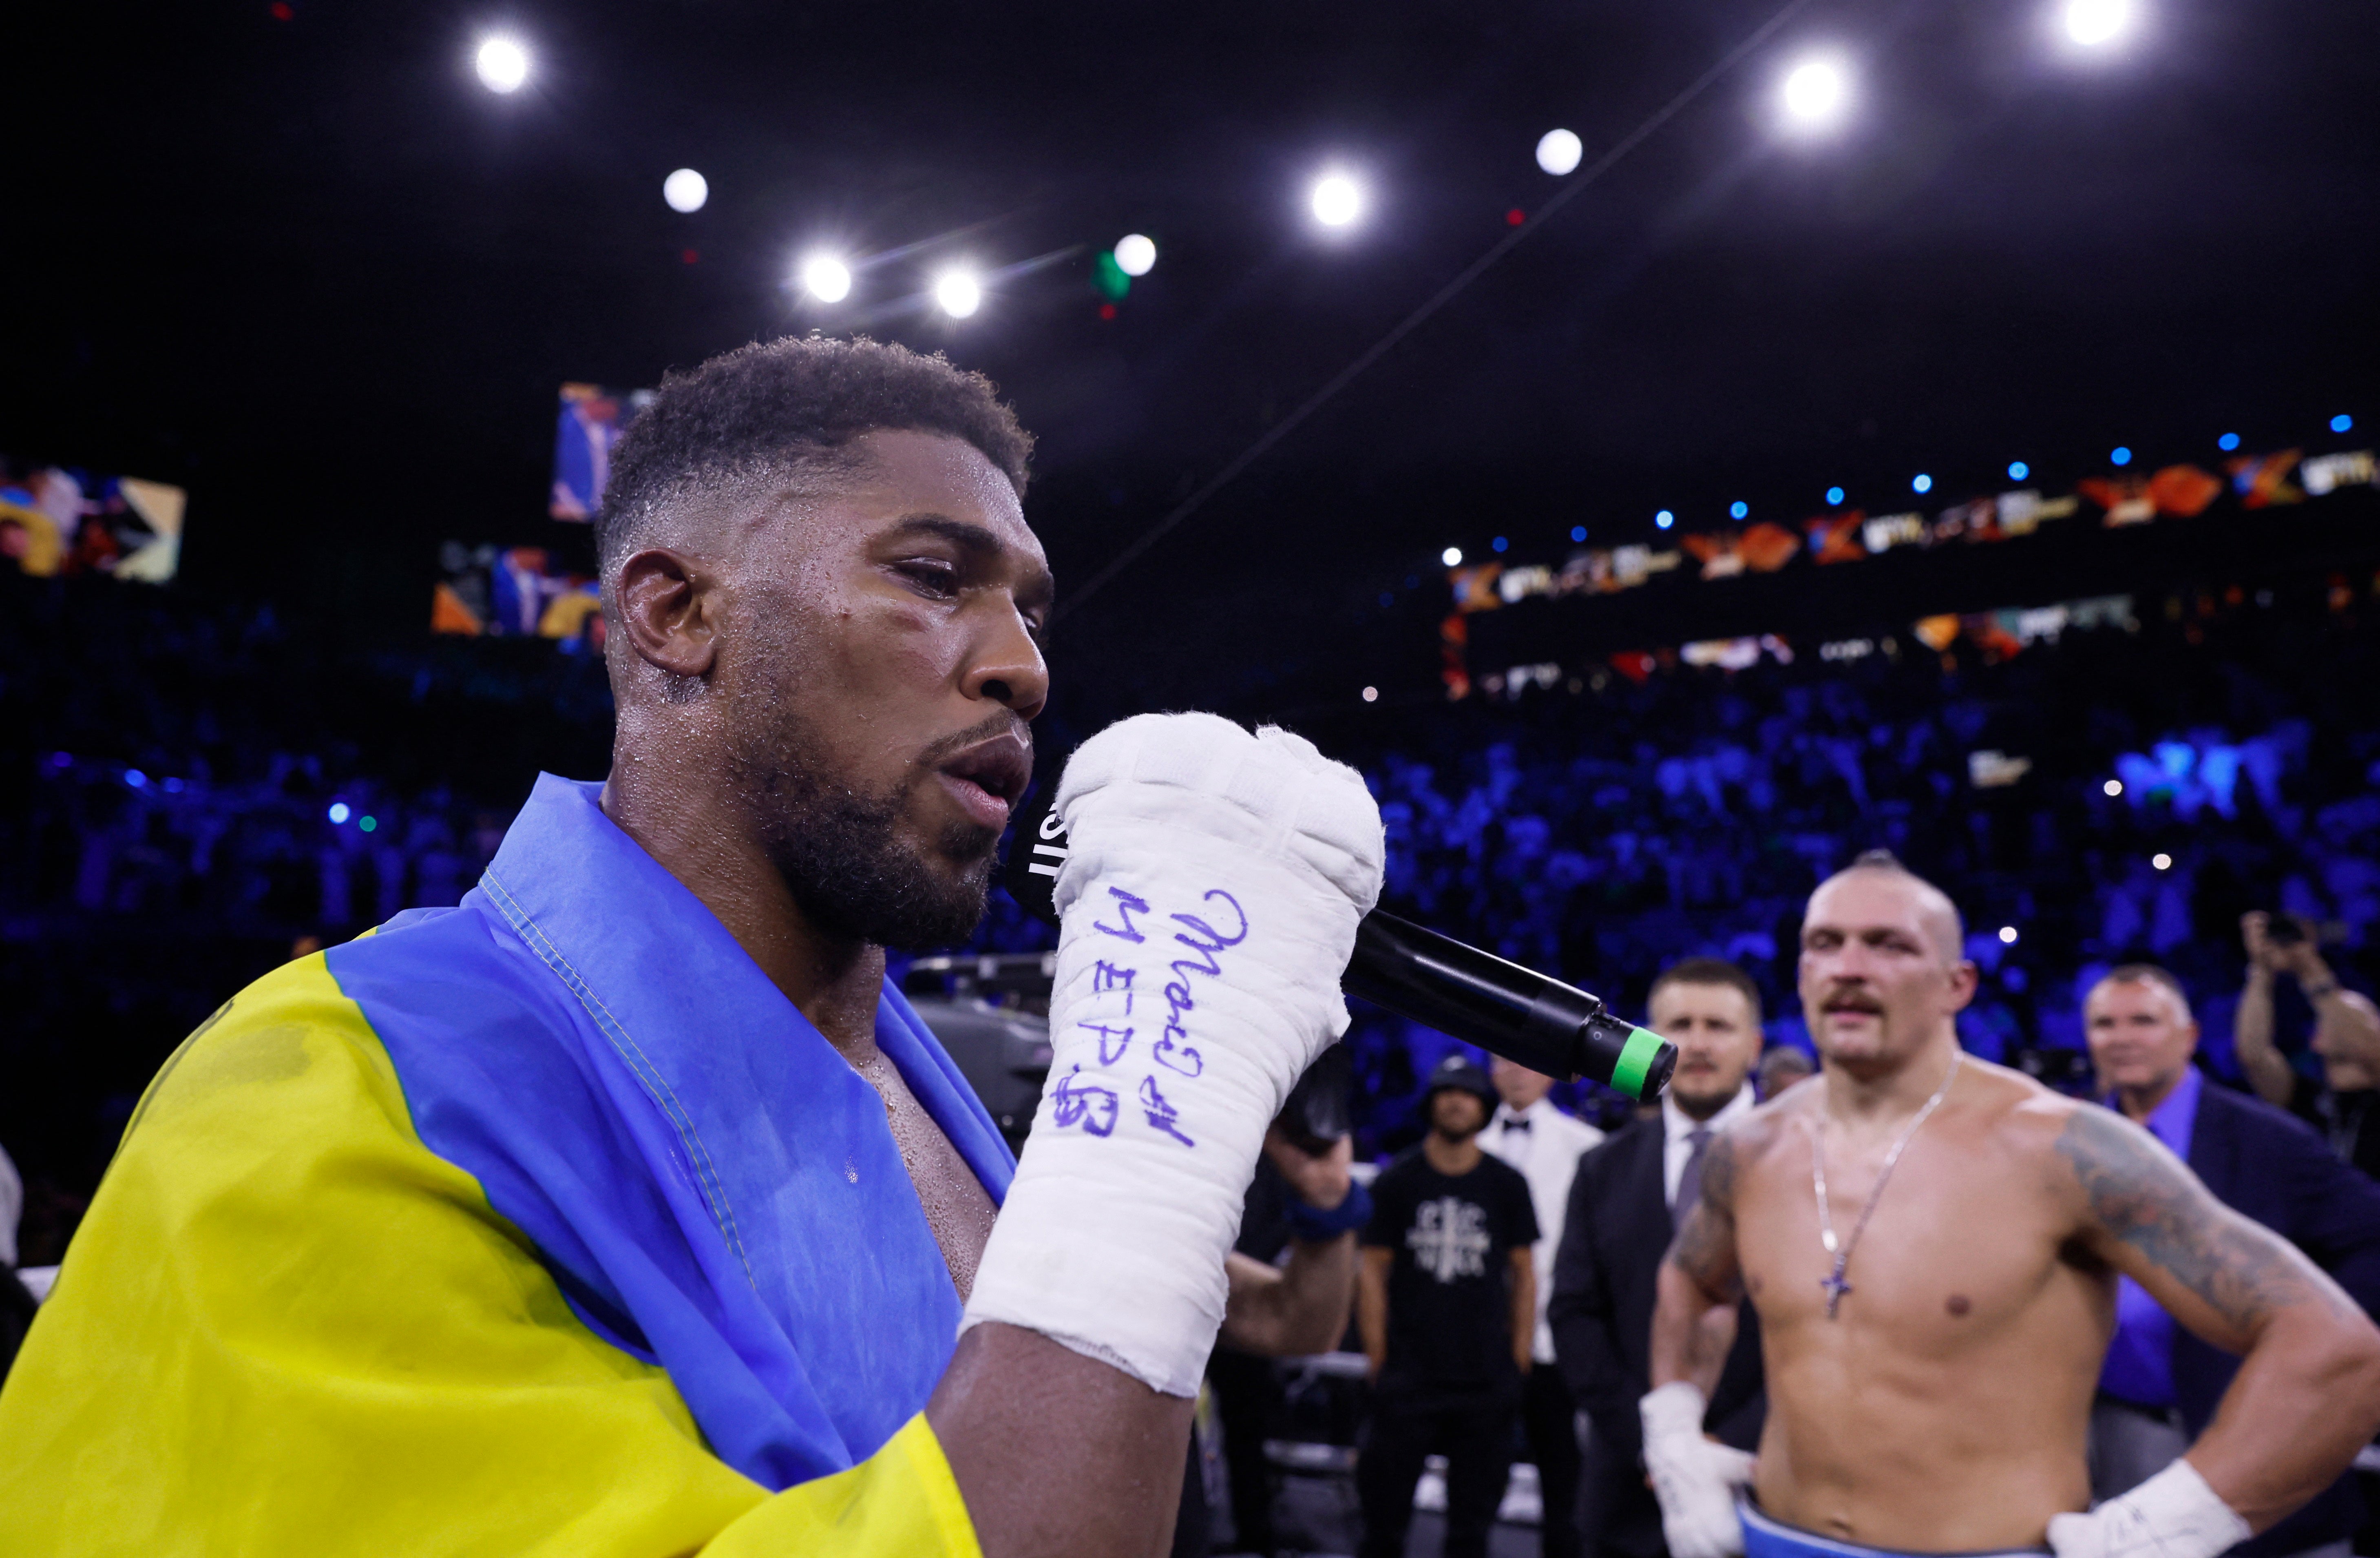 <p>Joshua seized a microphone after his second loss to Usyk and delivered a strange speech </p>